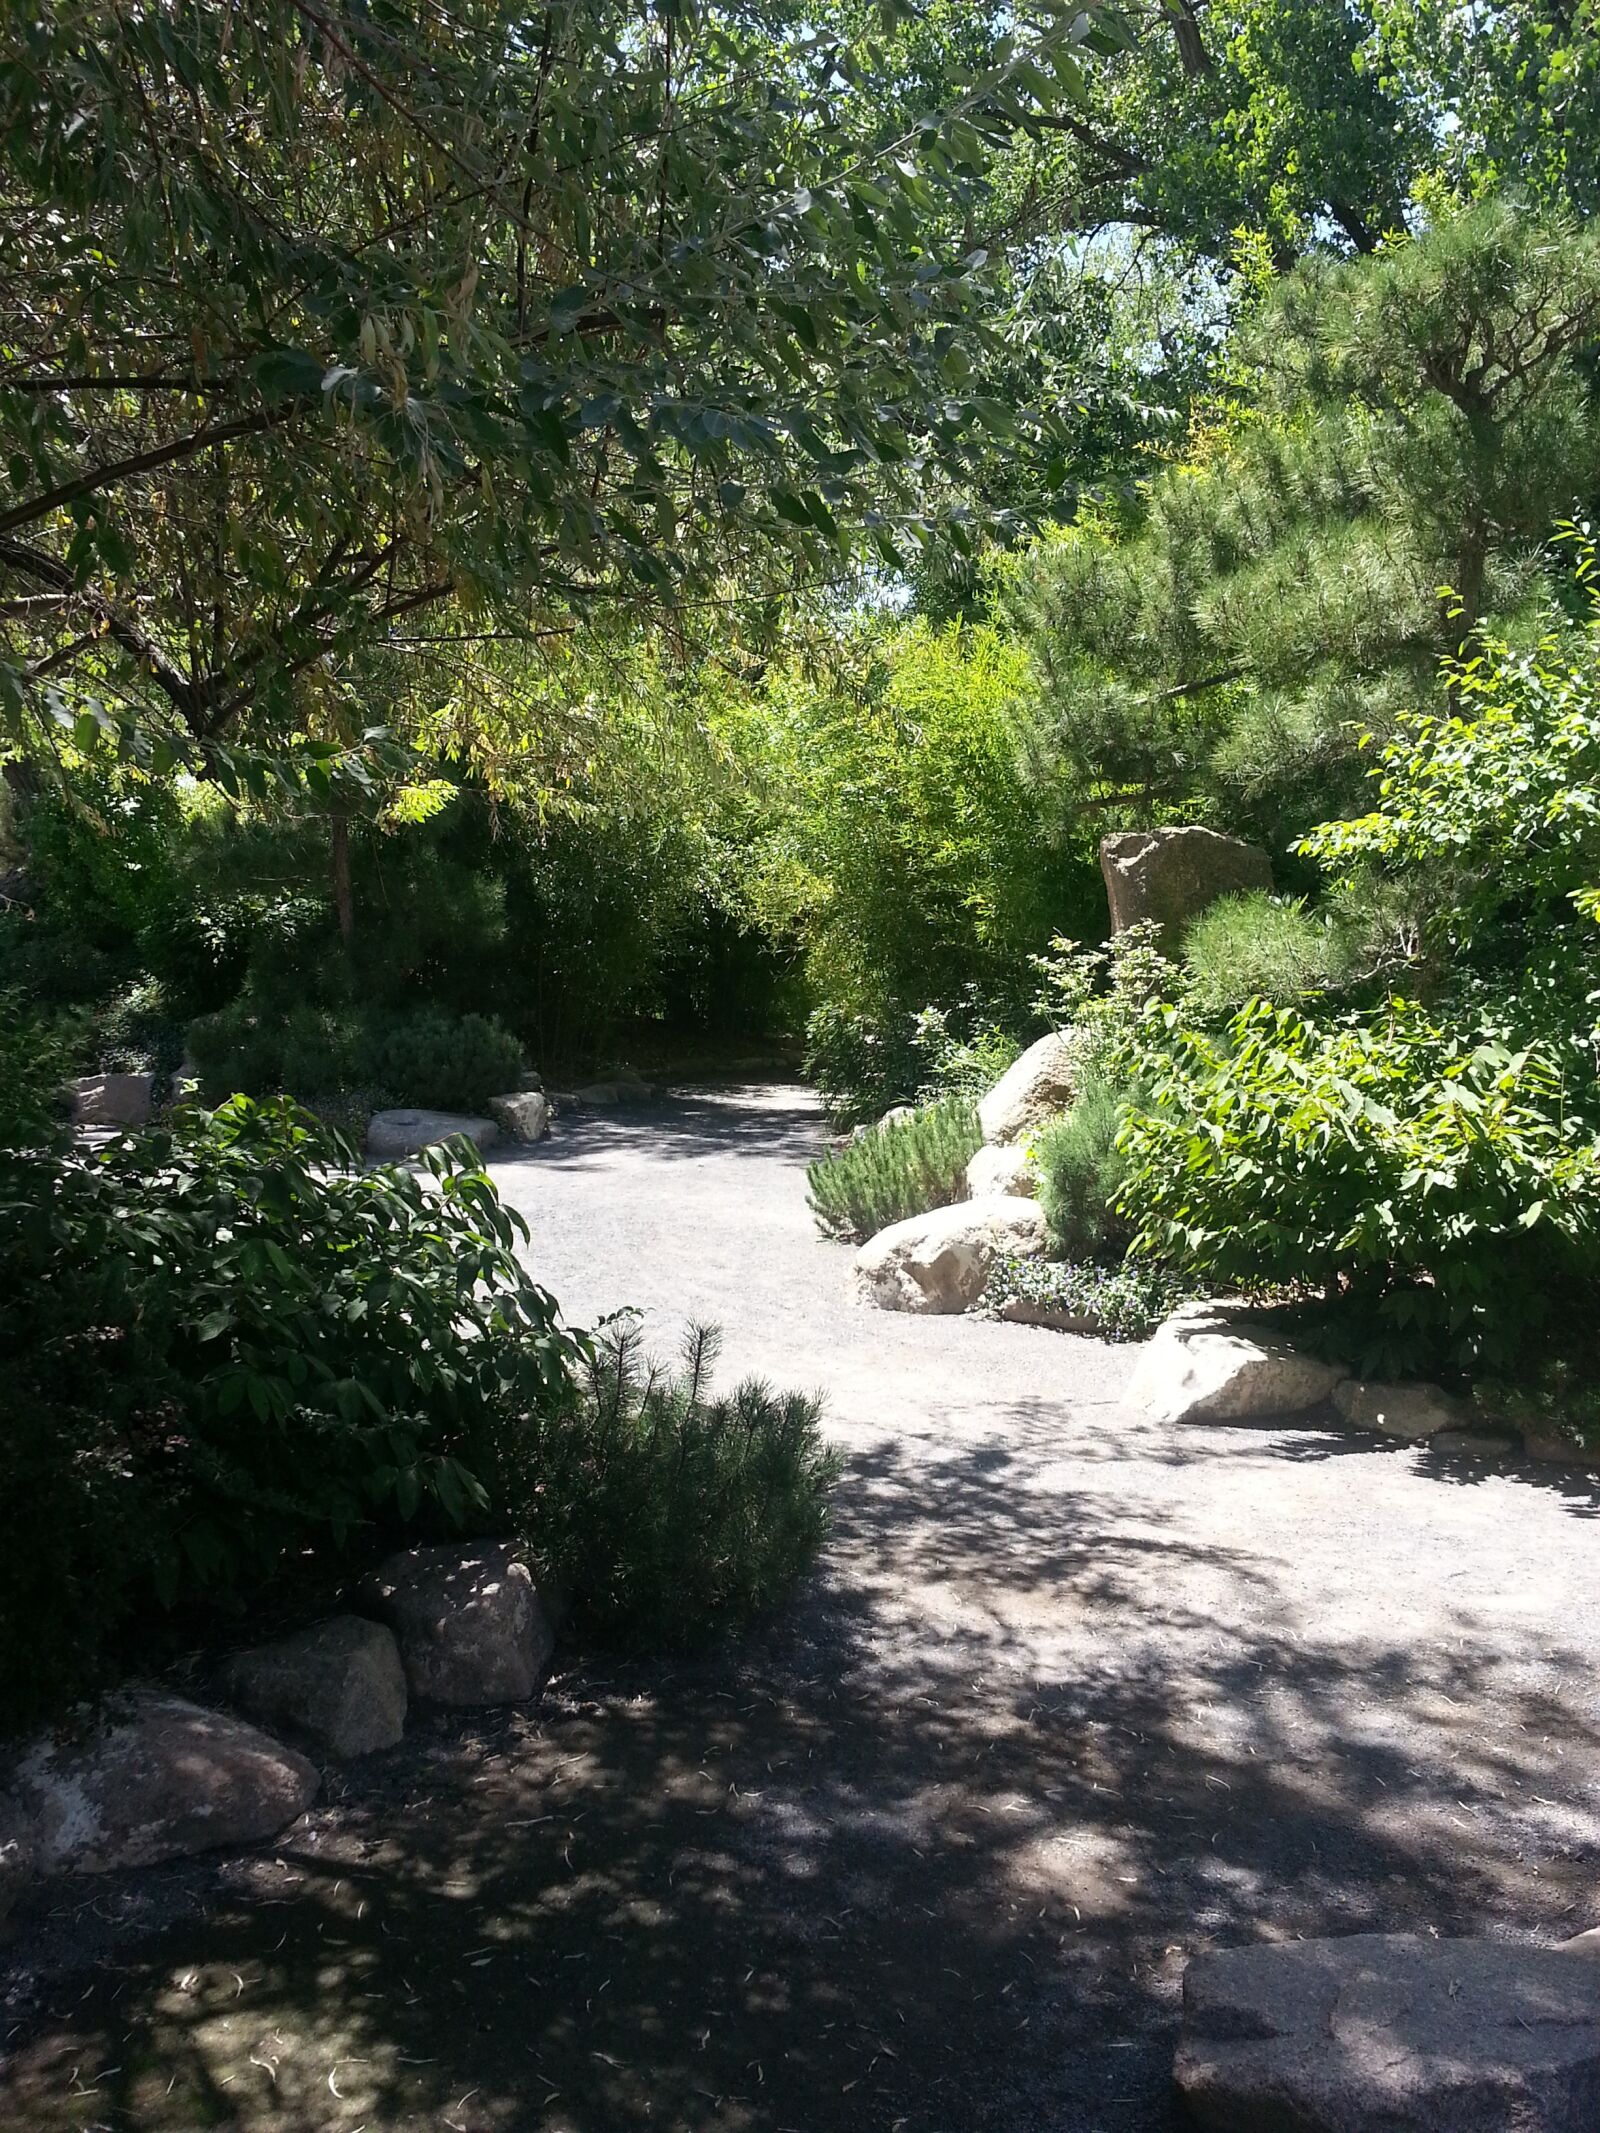 Samsung Galaxy S3 sample photo. Outdoors, bushes, trees photography